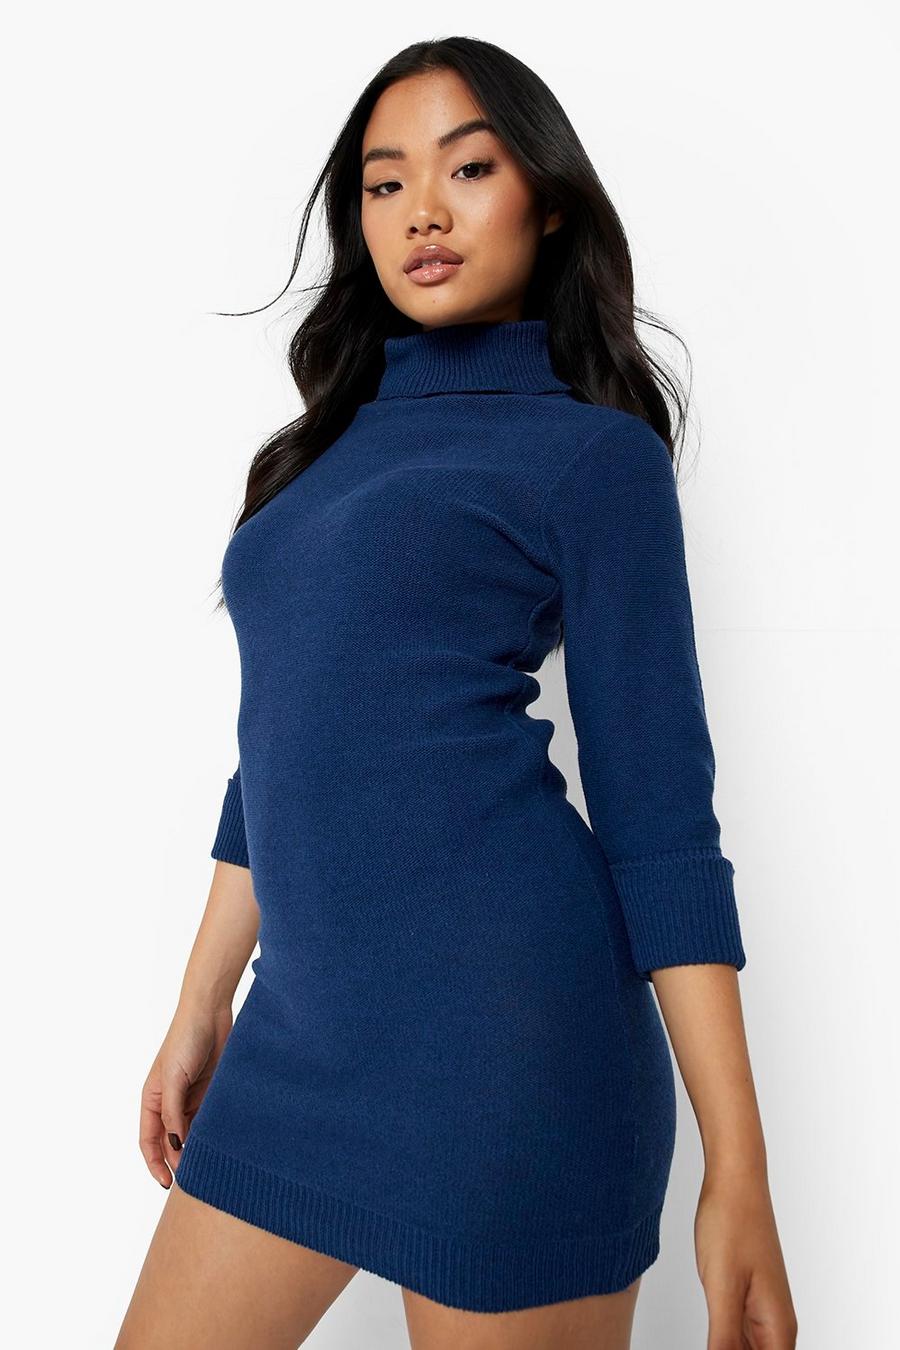 Petite - Robe pull courte en maille recyclée, Navy